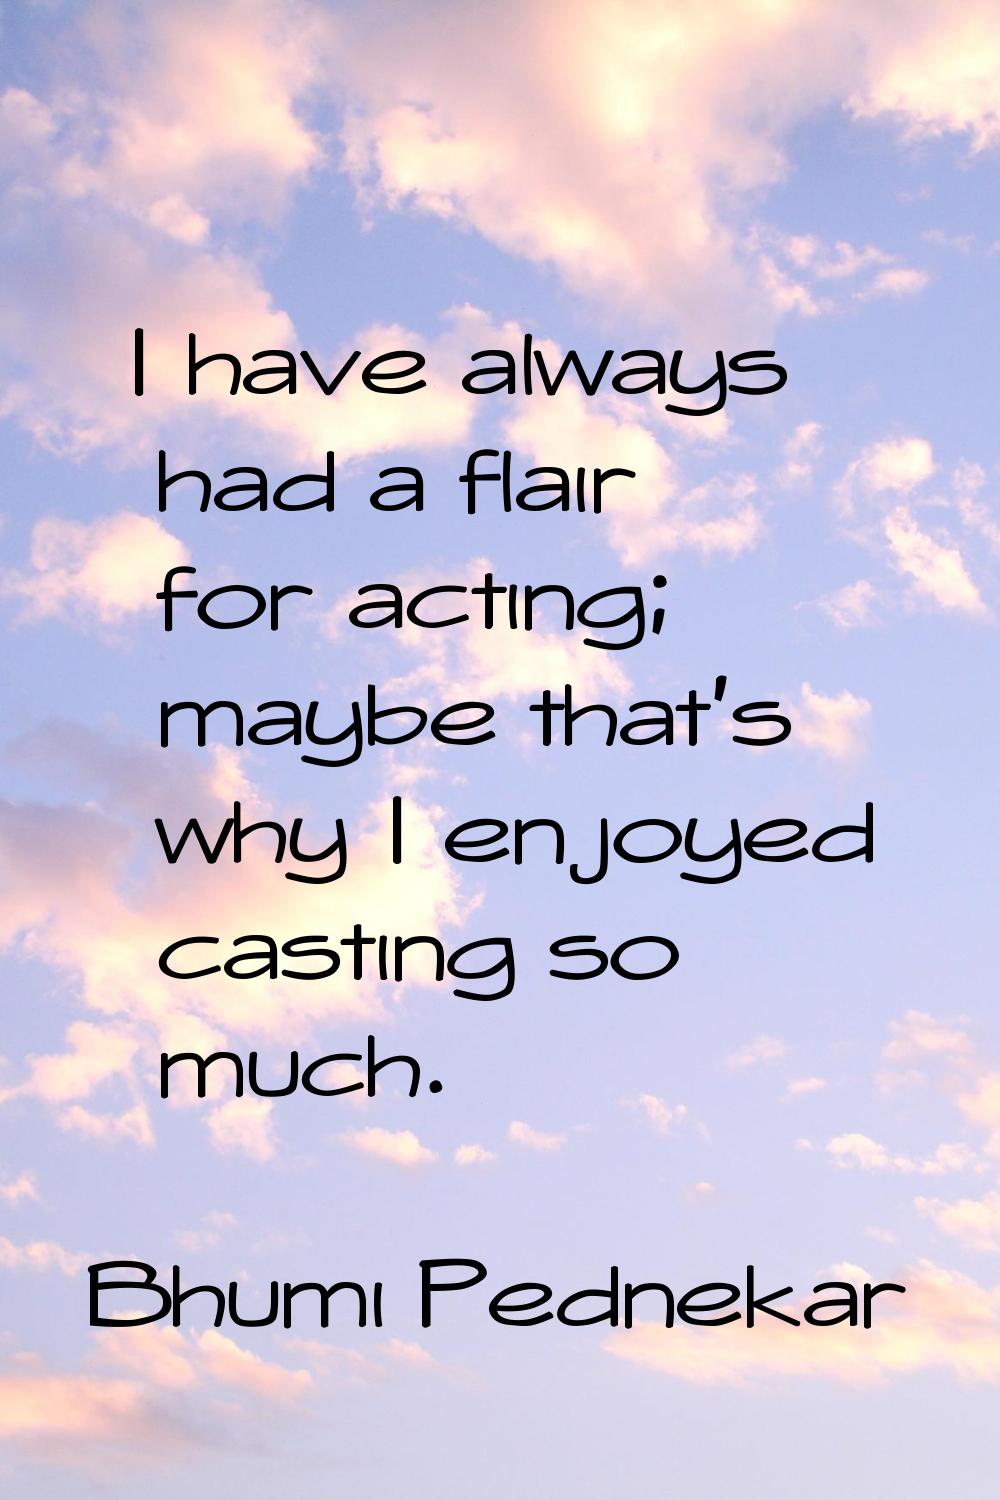 I have always had a flair for acting; maybe that's why I enjoyed casting so much.